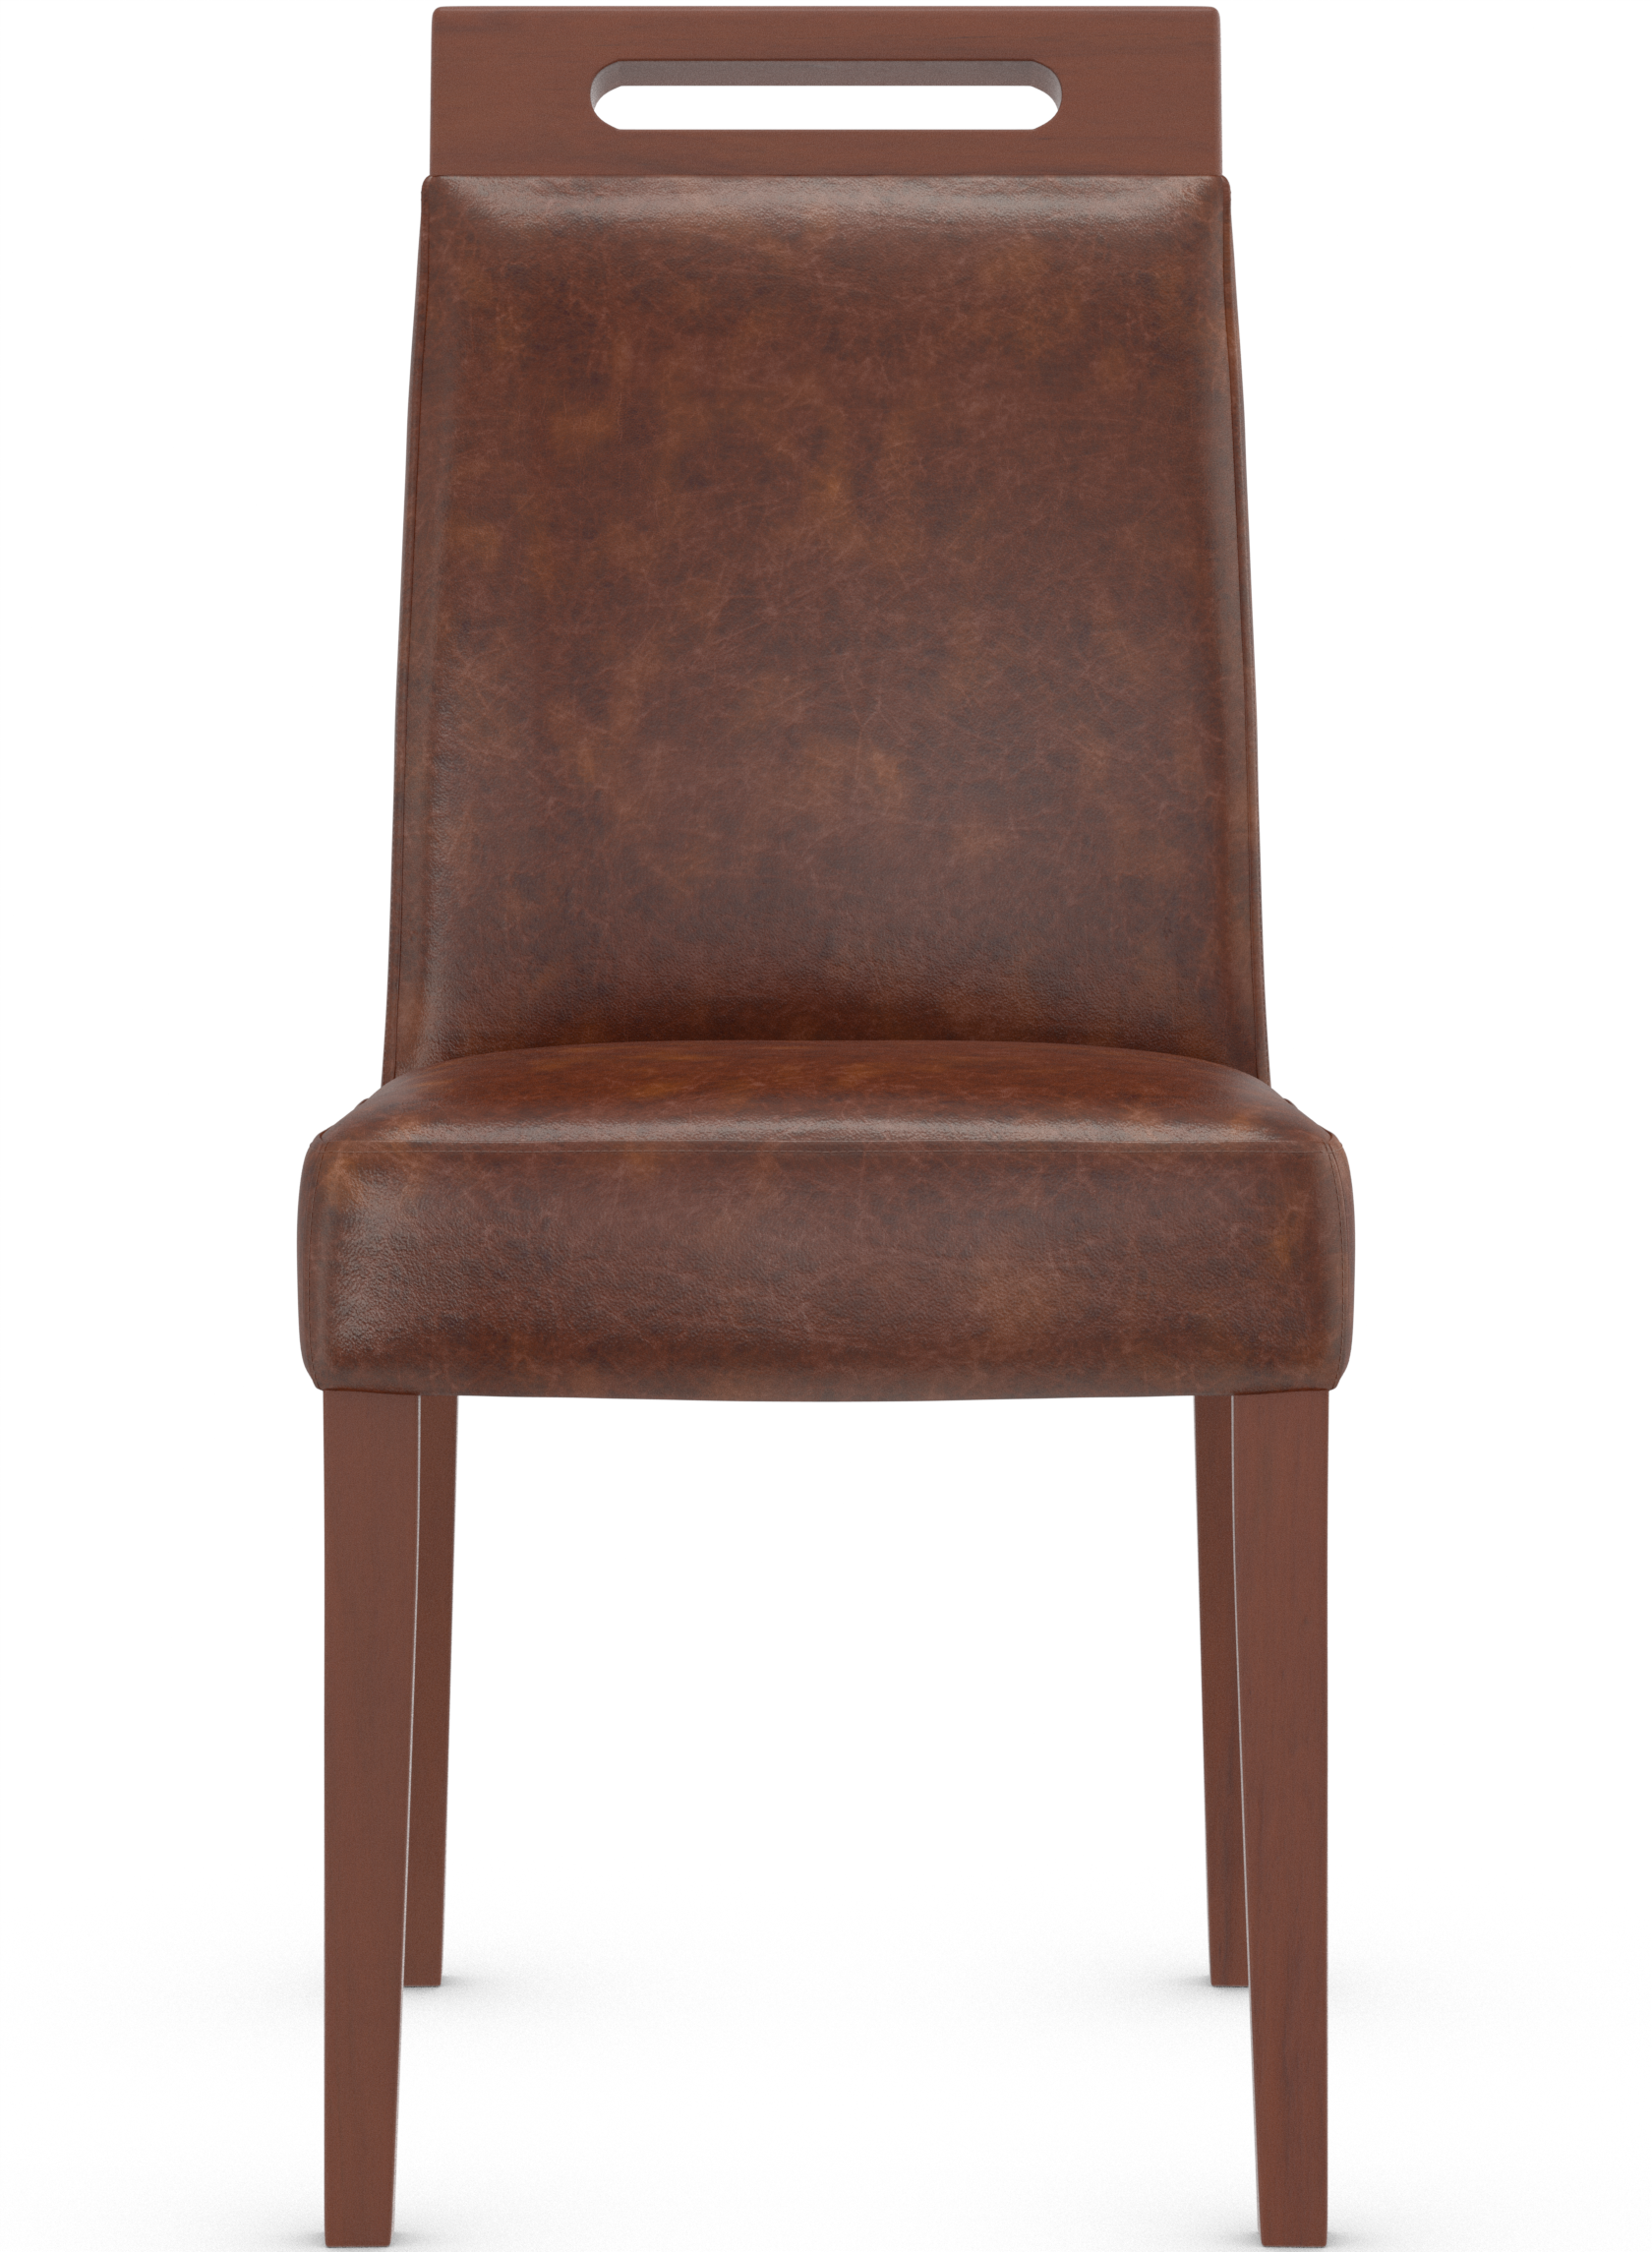 Modena Walnut Dining Chair Bonded Leather